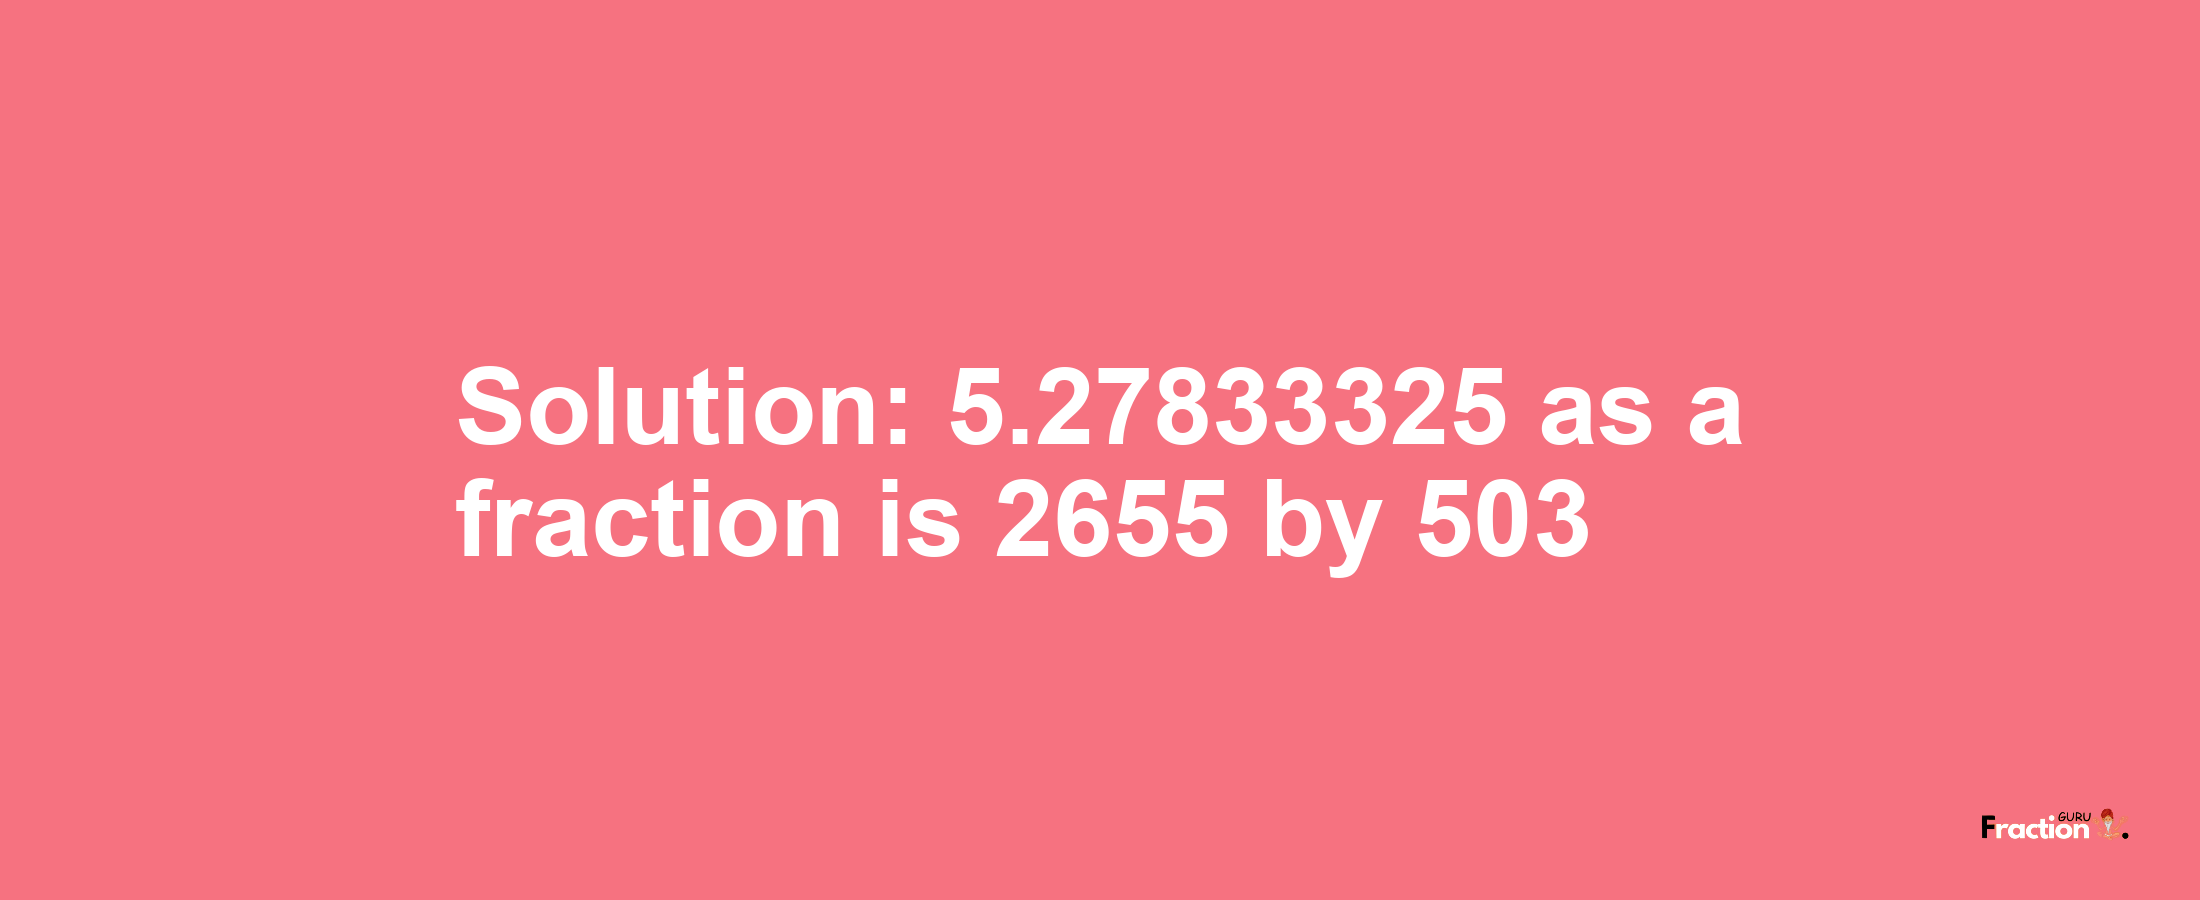 Solution:5.27833325 as a fraction is 2655/503